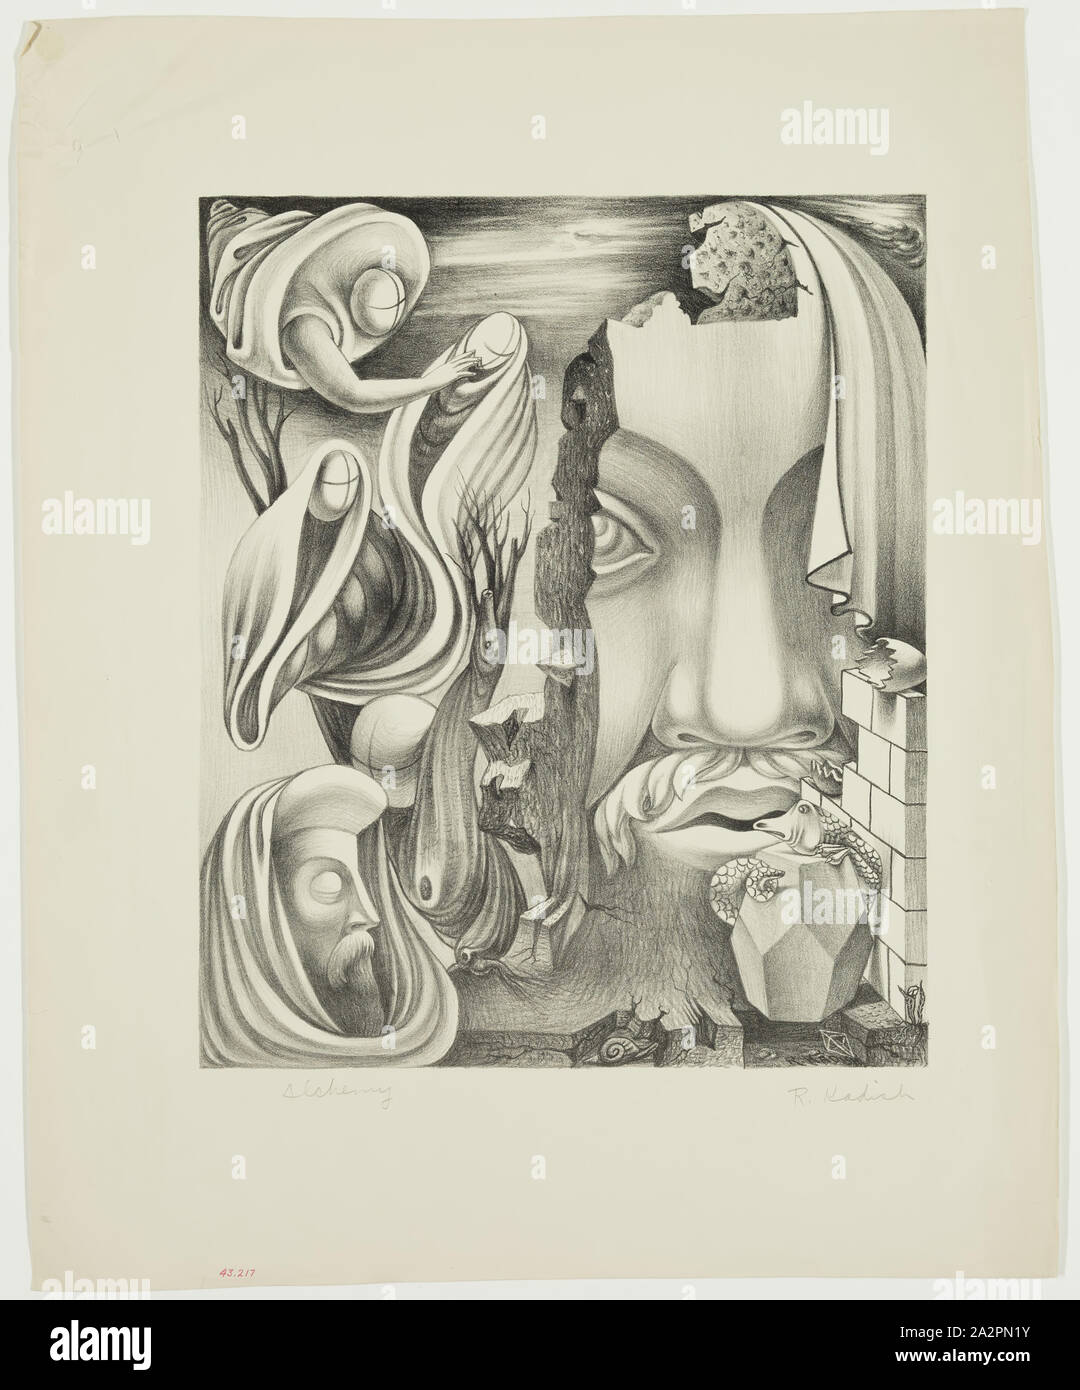 Reuben Kadish, American, 1913-1992, Alchemy, between 1934 and 1943, lithograph printed in black ink on wove paper, Image: 15 × 12 1/2 inches (38.1 × 31.8 cm Stock Photo